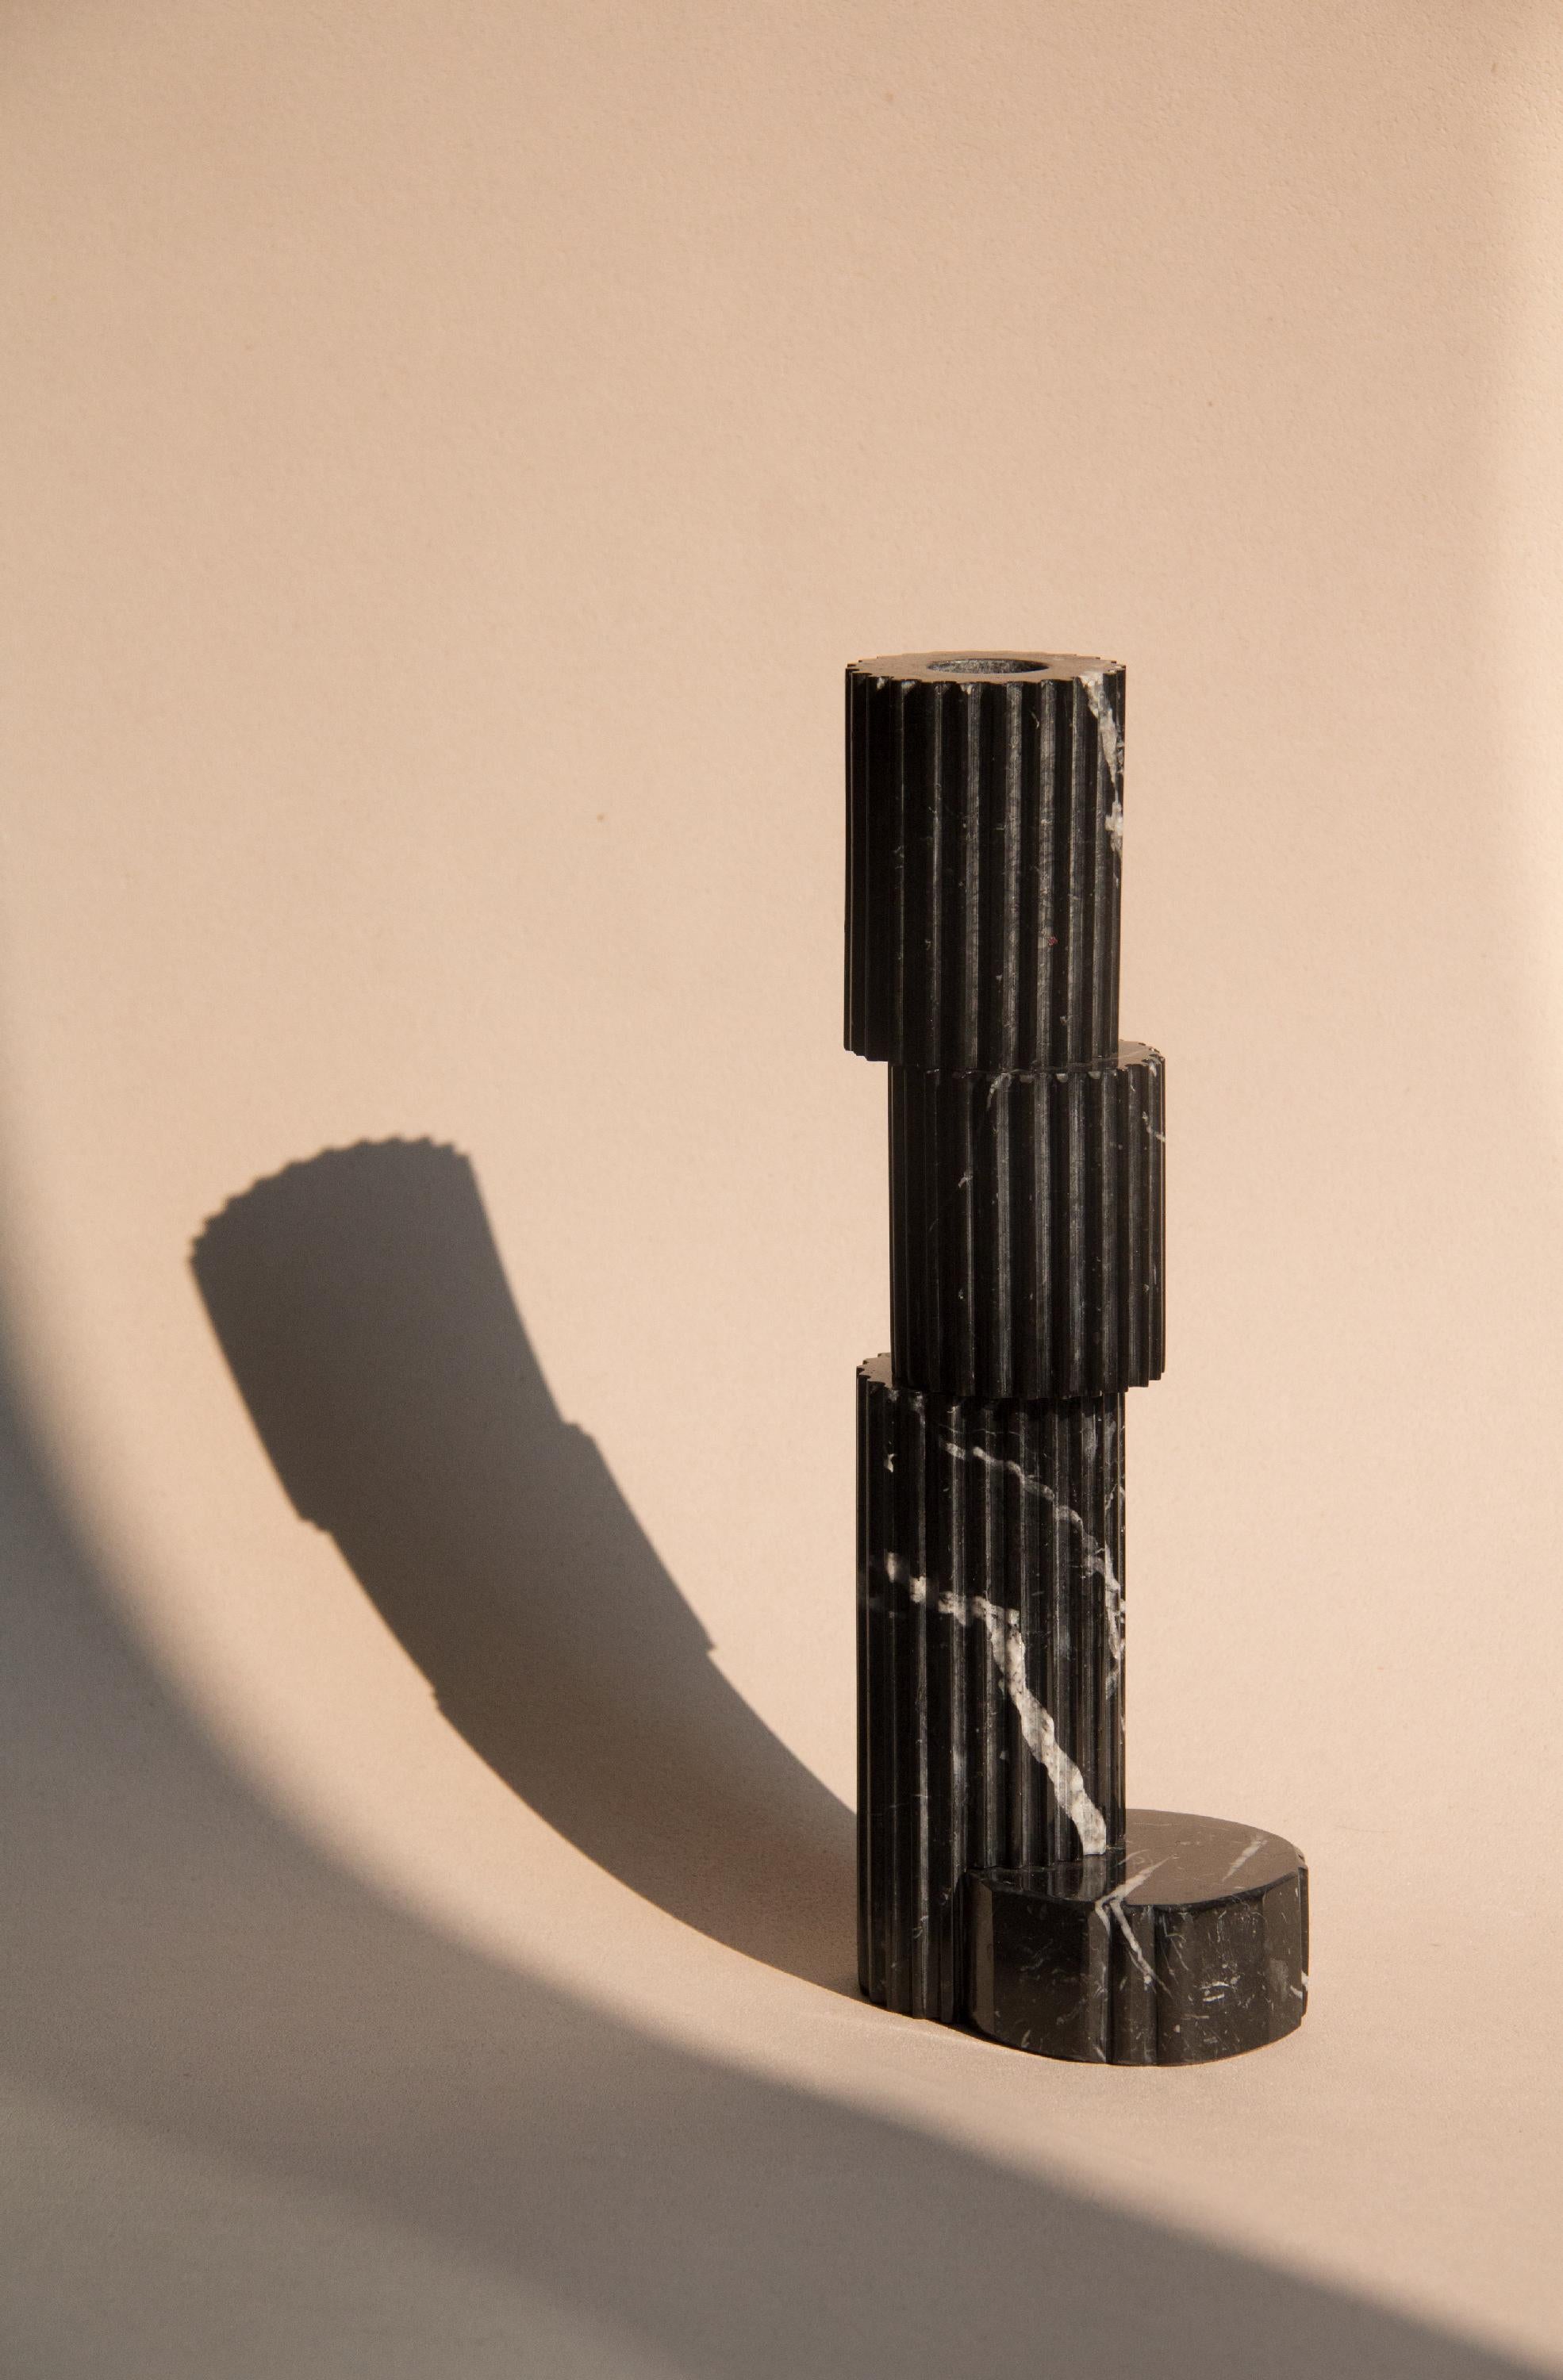 21 Century Contemporary Black Marble Rovinette Candleholder Handmade in Italy by Ilaria Bianchi.

Hand-turned candleholder in black Marquina marble produced by Italian artisans.
This Rovinette candleholder is born from a reflection on historical